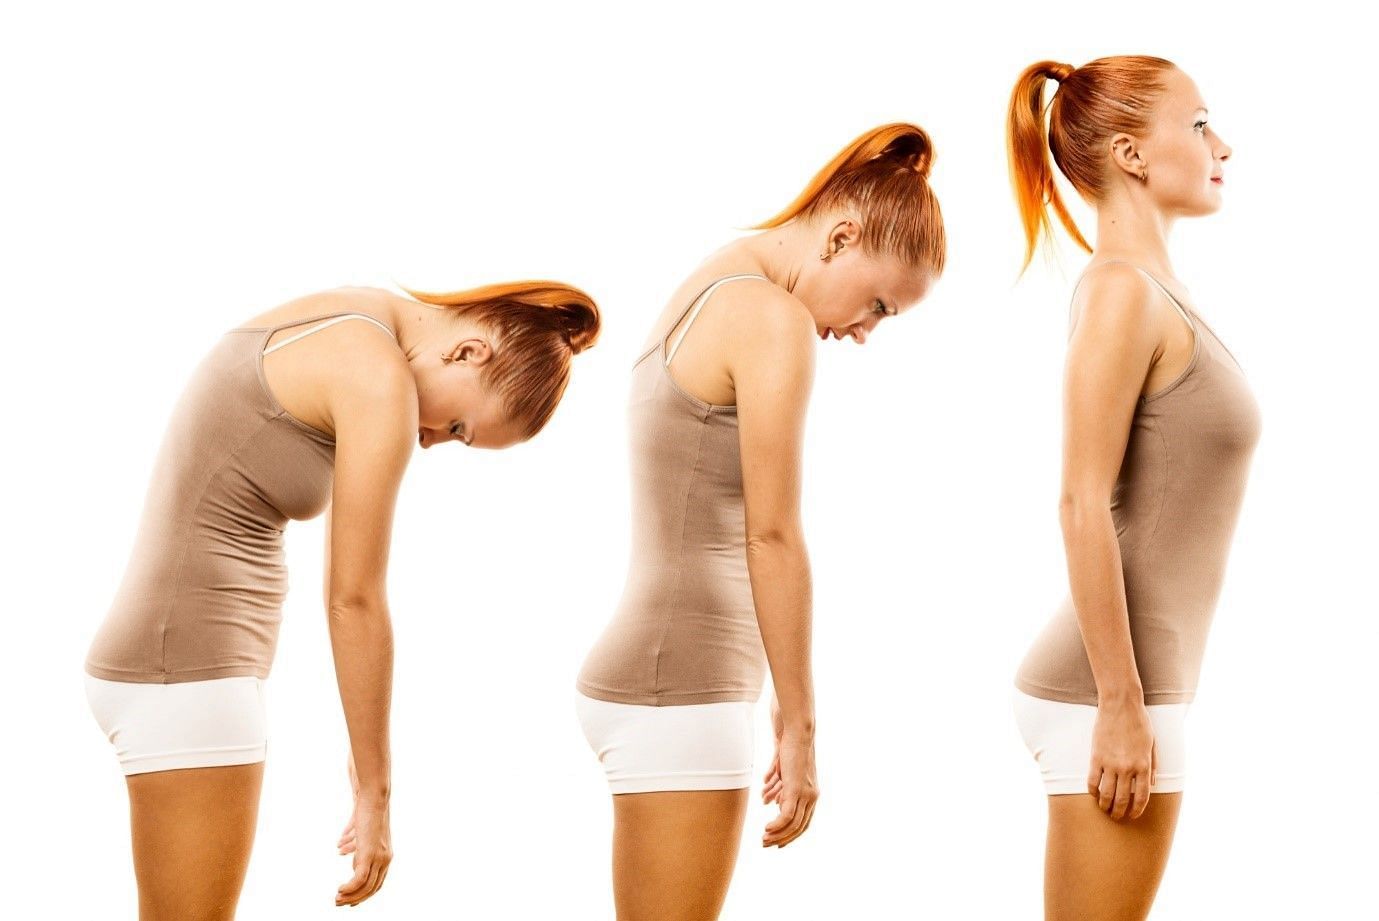 Bad posture can result in muscoskeleton problems (image by nikitabuida on freepik)